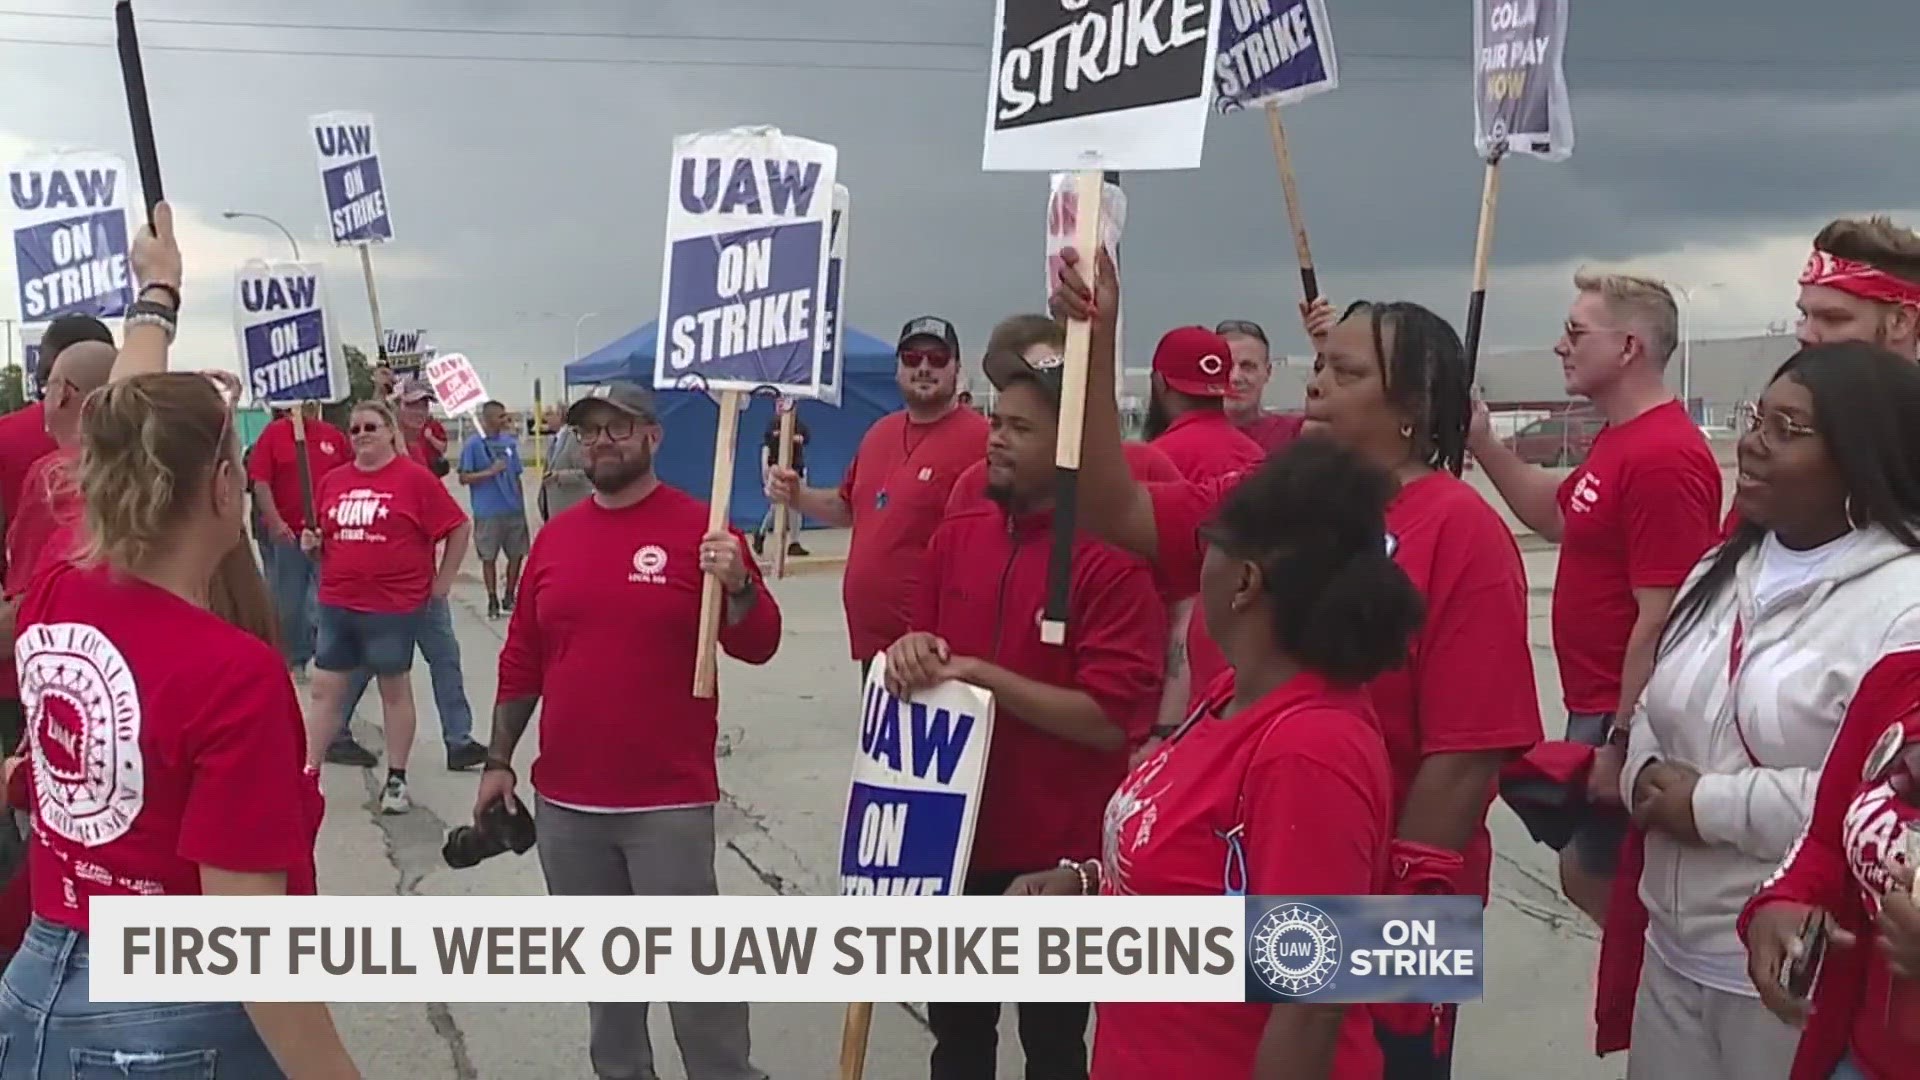 About 12,700 UAW workers remain on strike, but not all plants are being impacted.